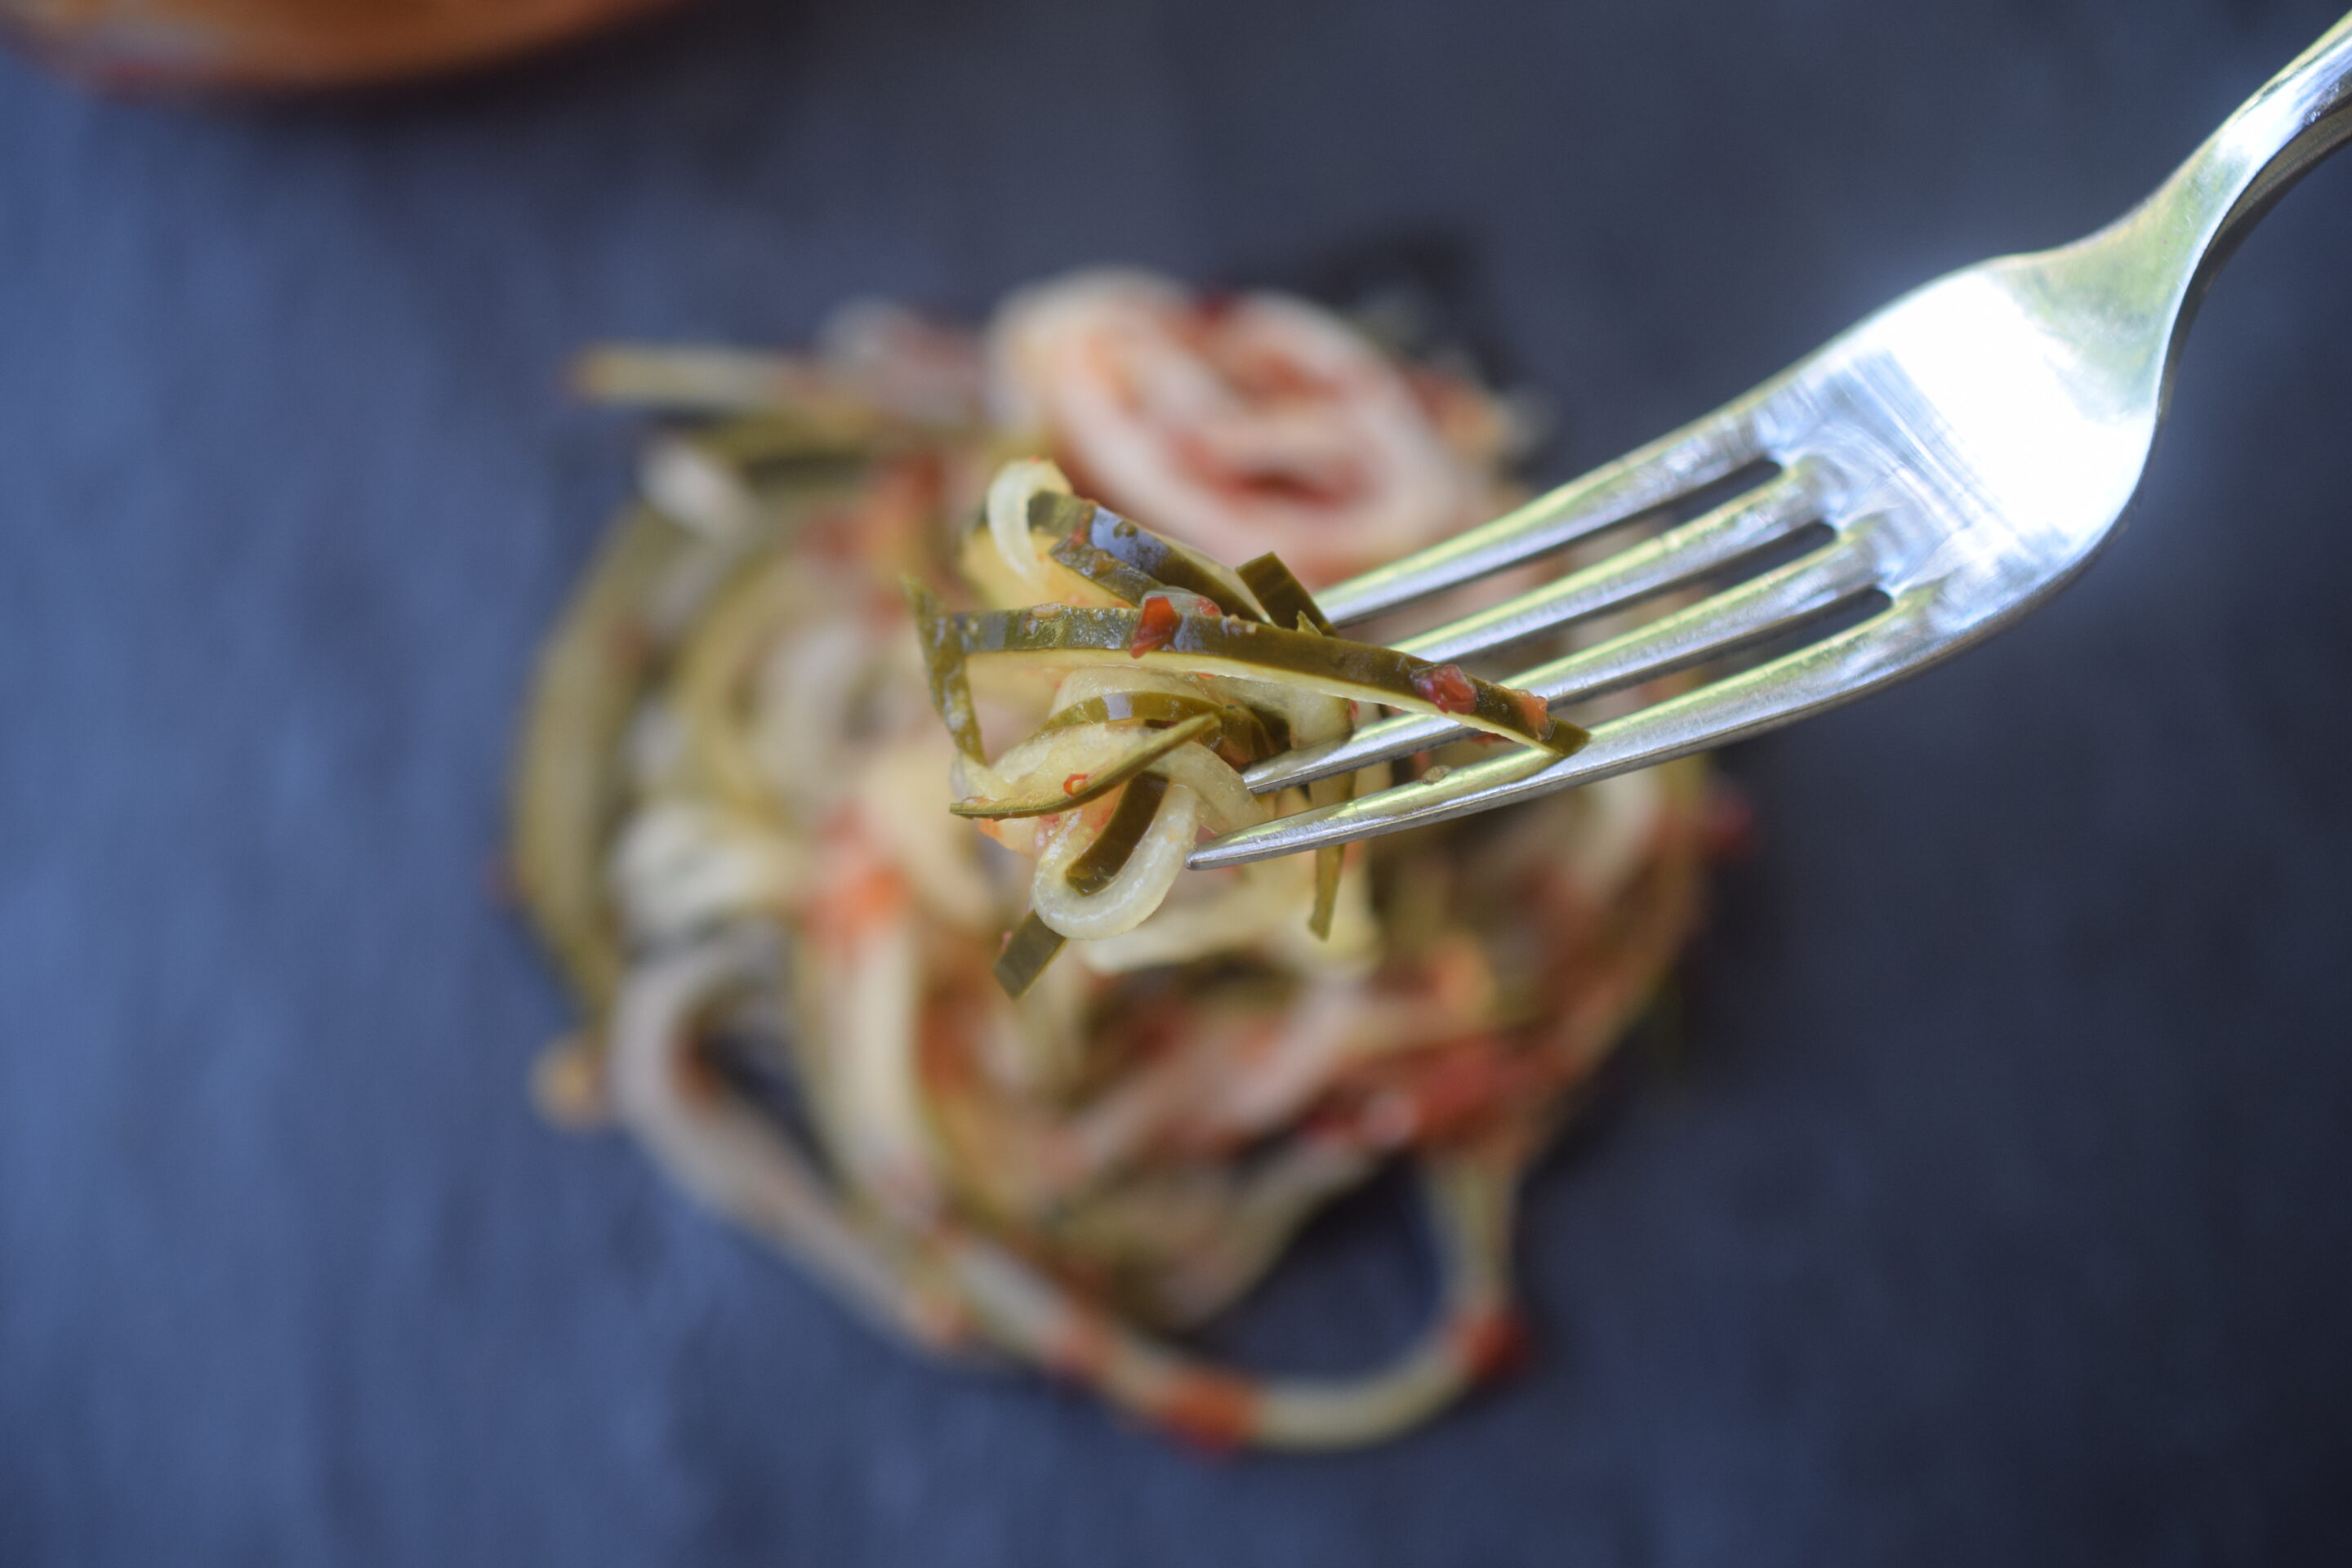 Yum! Ready in just a few hours, these Spicy Spiralized Pickled Cucumbers are addictively delicious and can go with so many things! Makes a great hostess gift too!